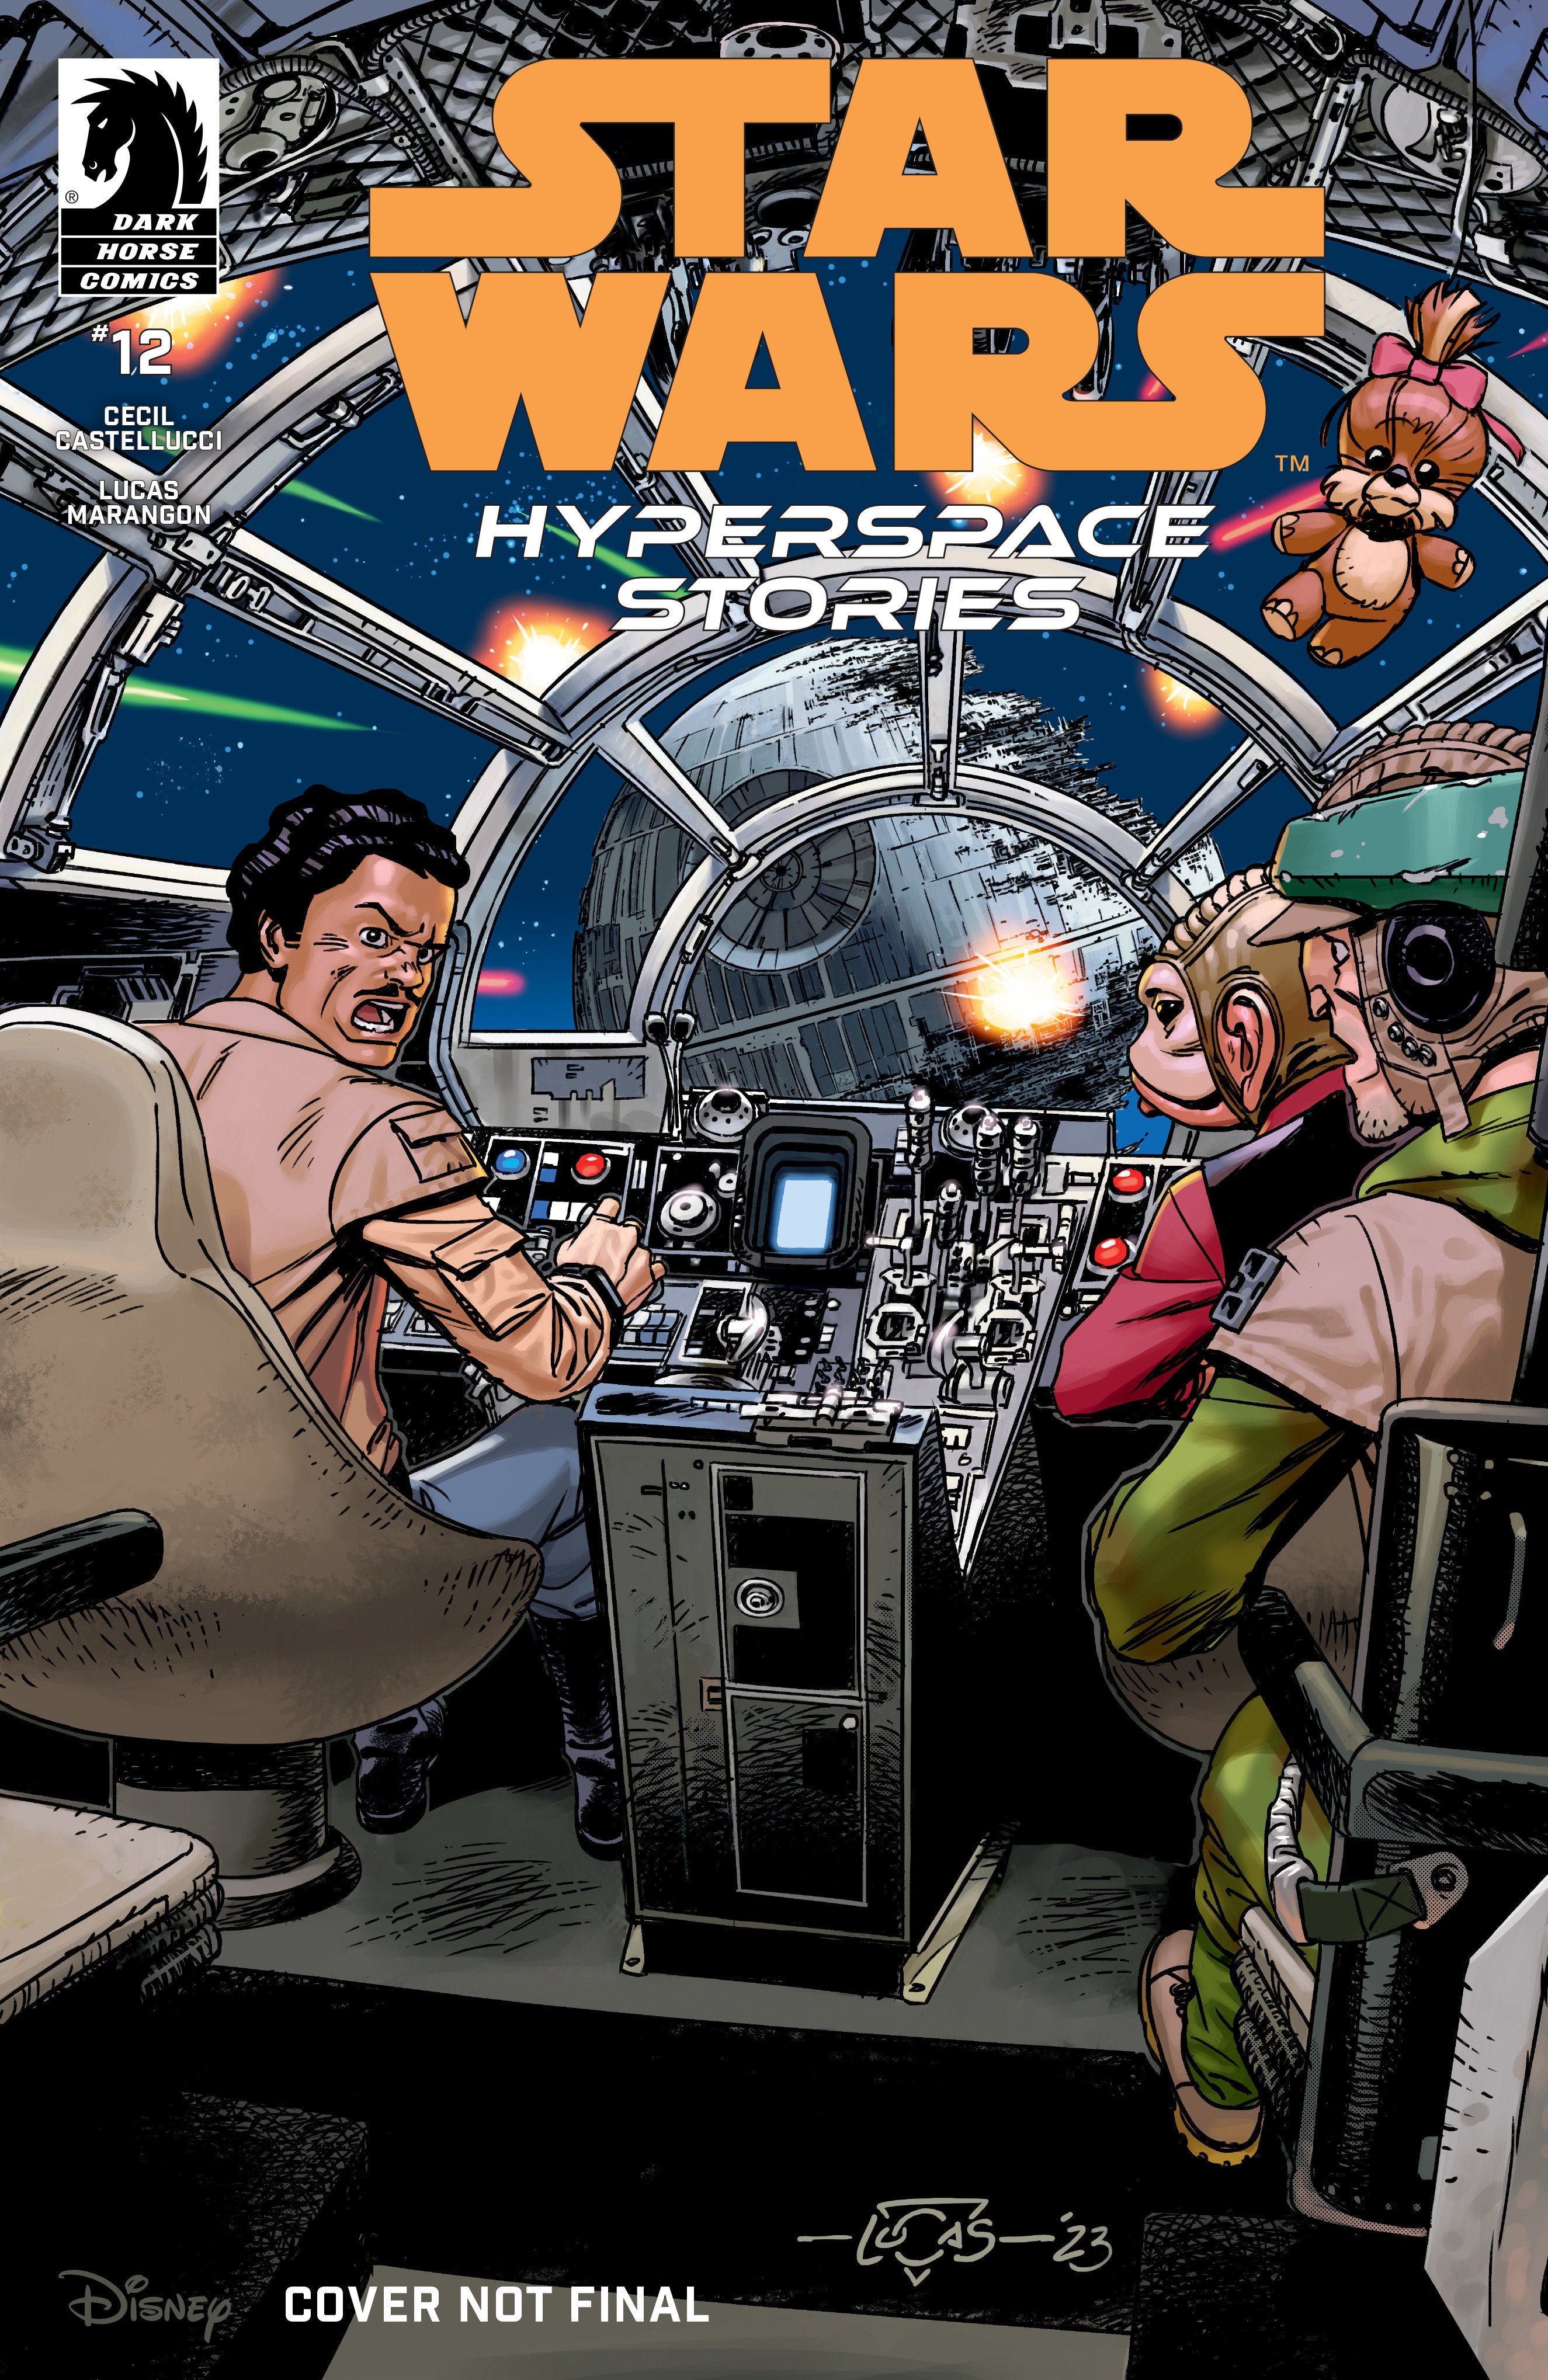 Star Wars: Hyperspace Stories #12 (Cover A) (Lucas Marangon) | Game Master's Emporium (The New GME)